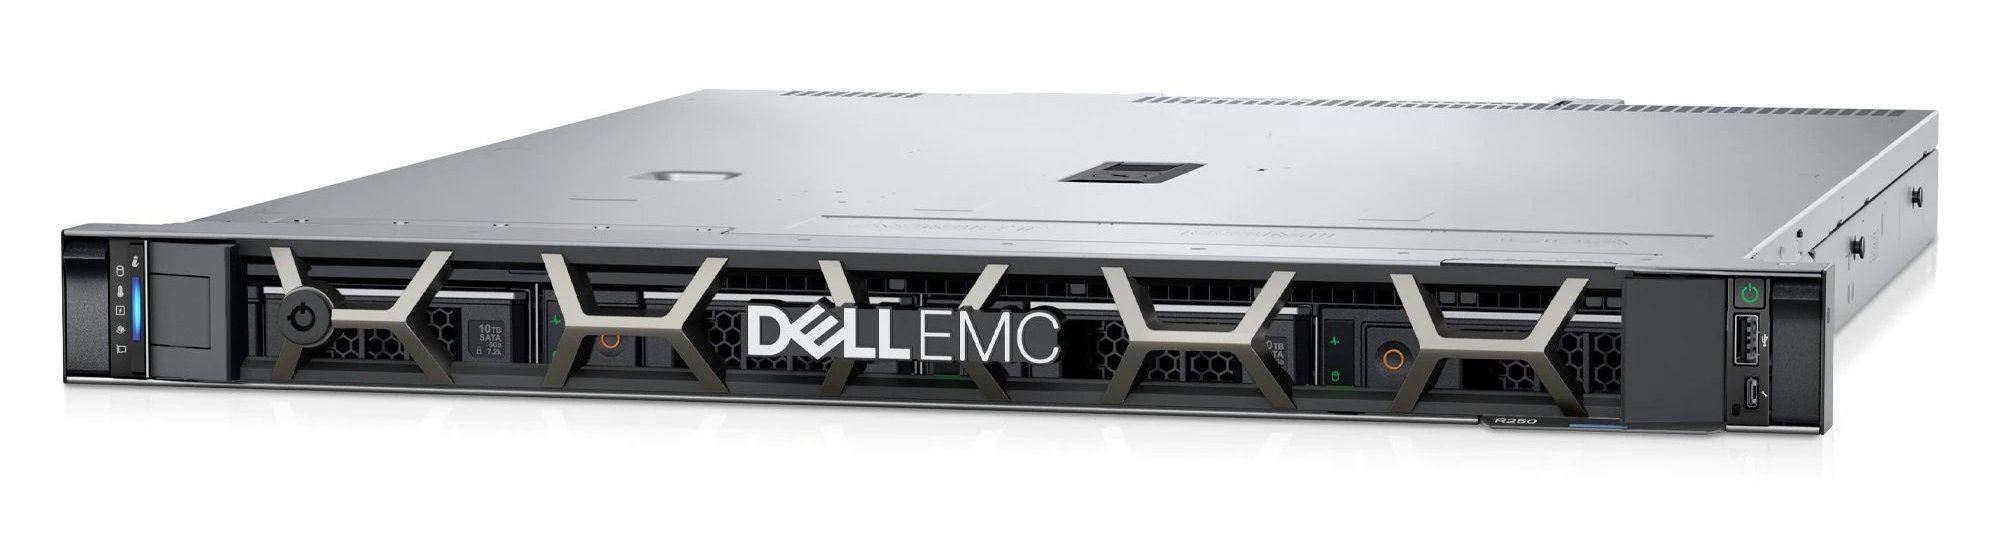 PowerEdge R250 Rack Server Intel Xeon E-2314 2.8GHz, 8M Cache, 4C/4T, Turbo (65W), 3200 MT/s,  16GB UDIMM, 3200MT/s, ECC, 480GB SSD SATA Read Intensive 6Gbps 512 2.5in Hot-plug AG Drive,3.5in HYB CARR, 3.5" Chassis with up to x4 Hot Plug Hard Drives, Motherboard with Broadcom 5720 Dual Port 1Gb